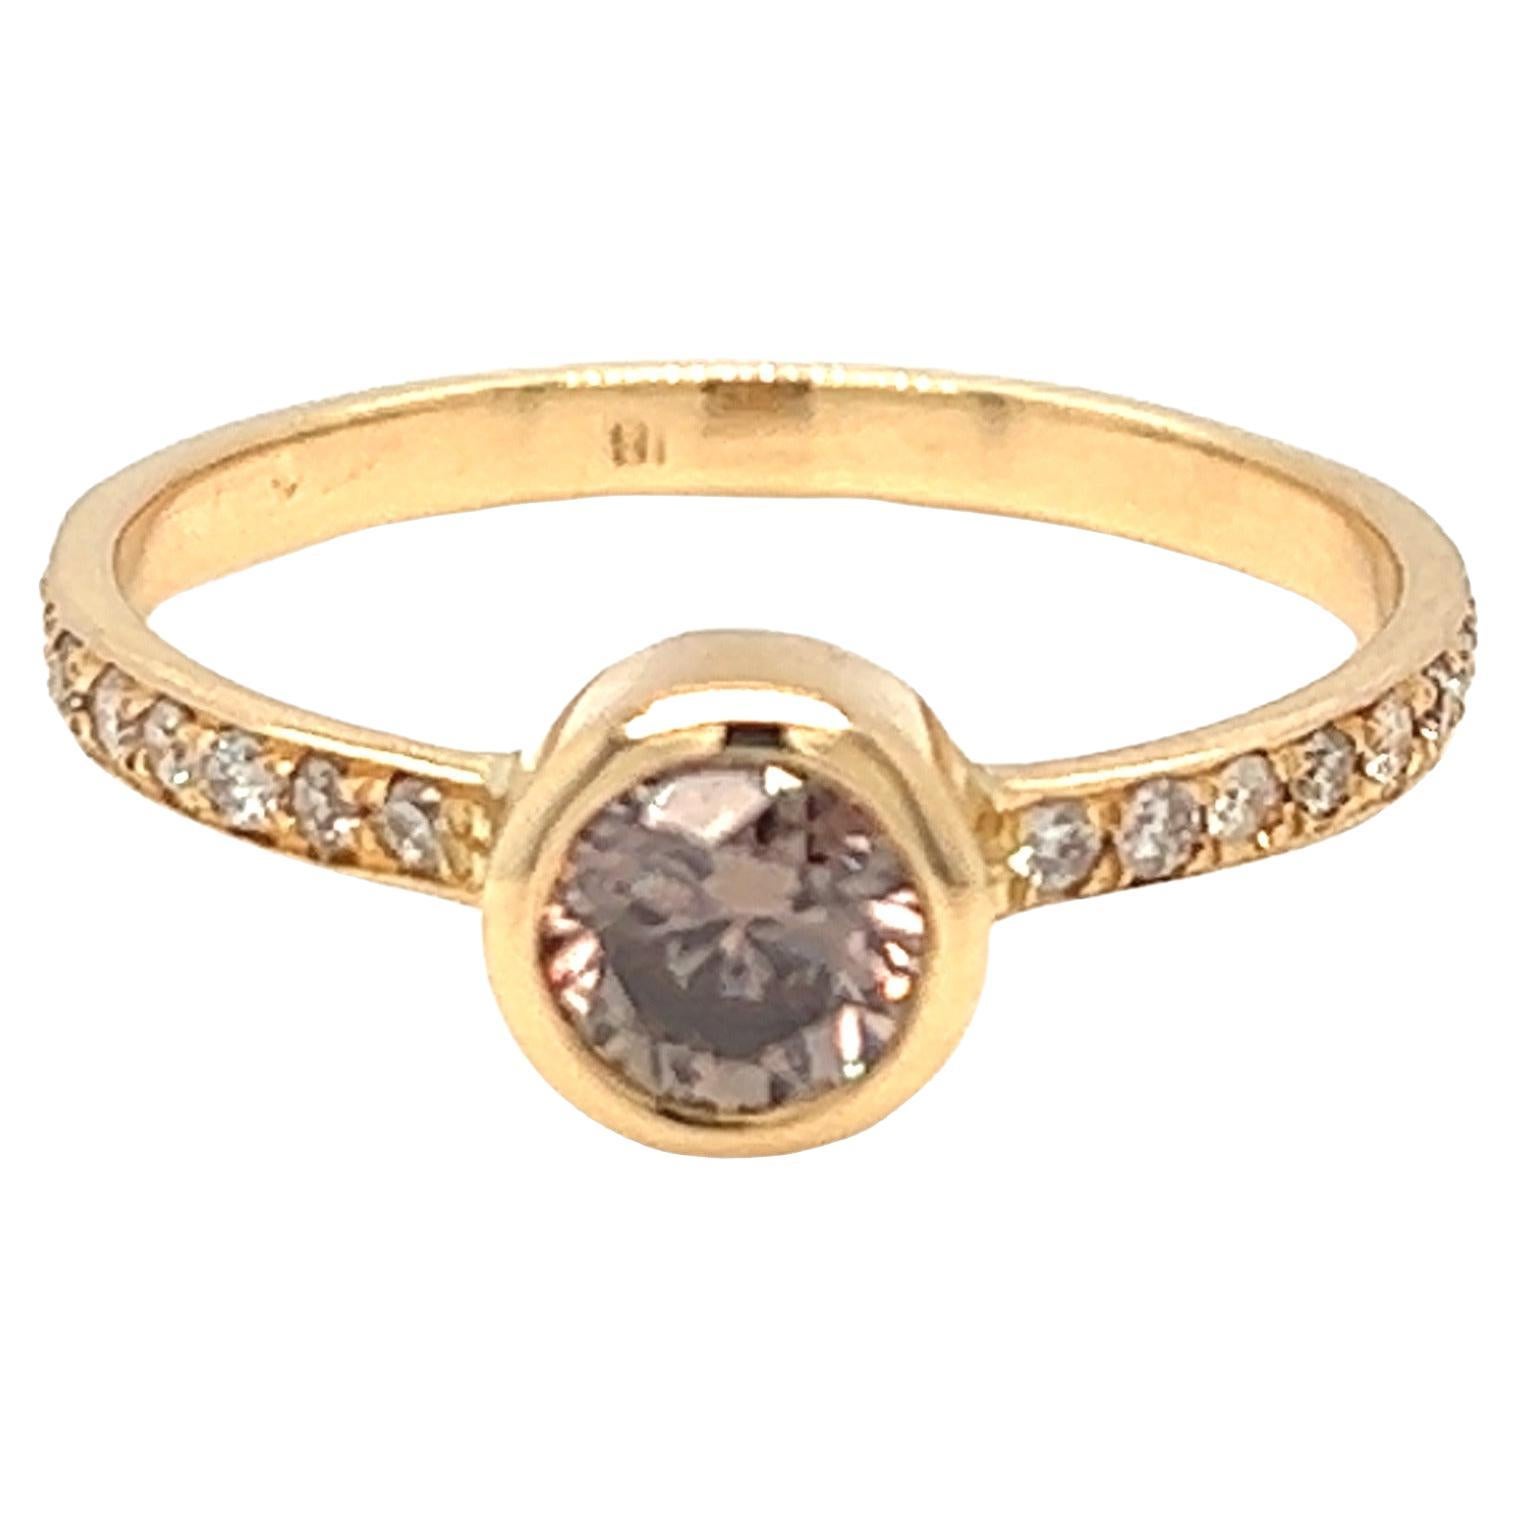 Designed and handcrafted by Nari Fine Jewels in Beverly Hills, California, the 0.50 carat cognac colored round brilliant cut diamond is set in 18K yellow gold bezel and accented with 0.10 carat small diamonds on the ring band. The ring is currently